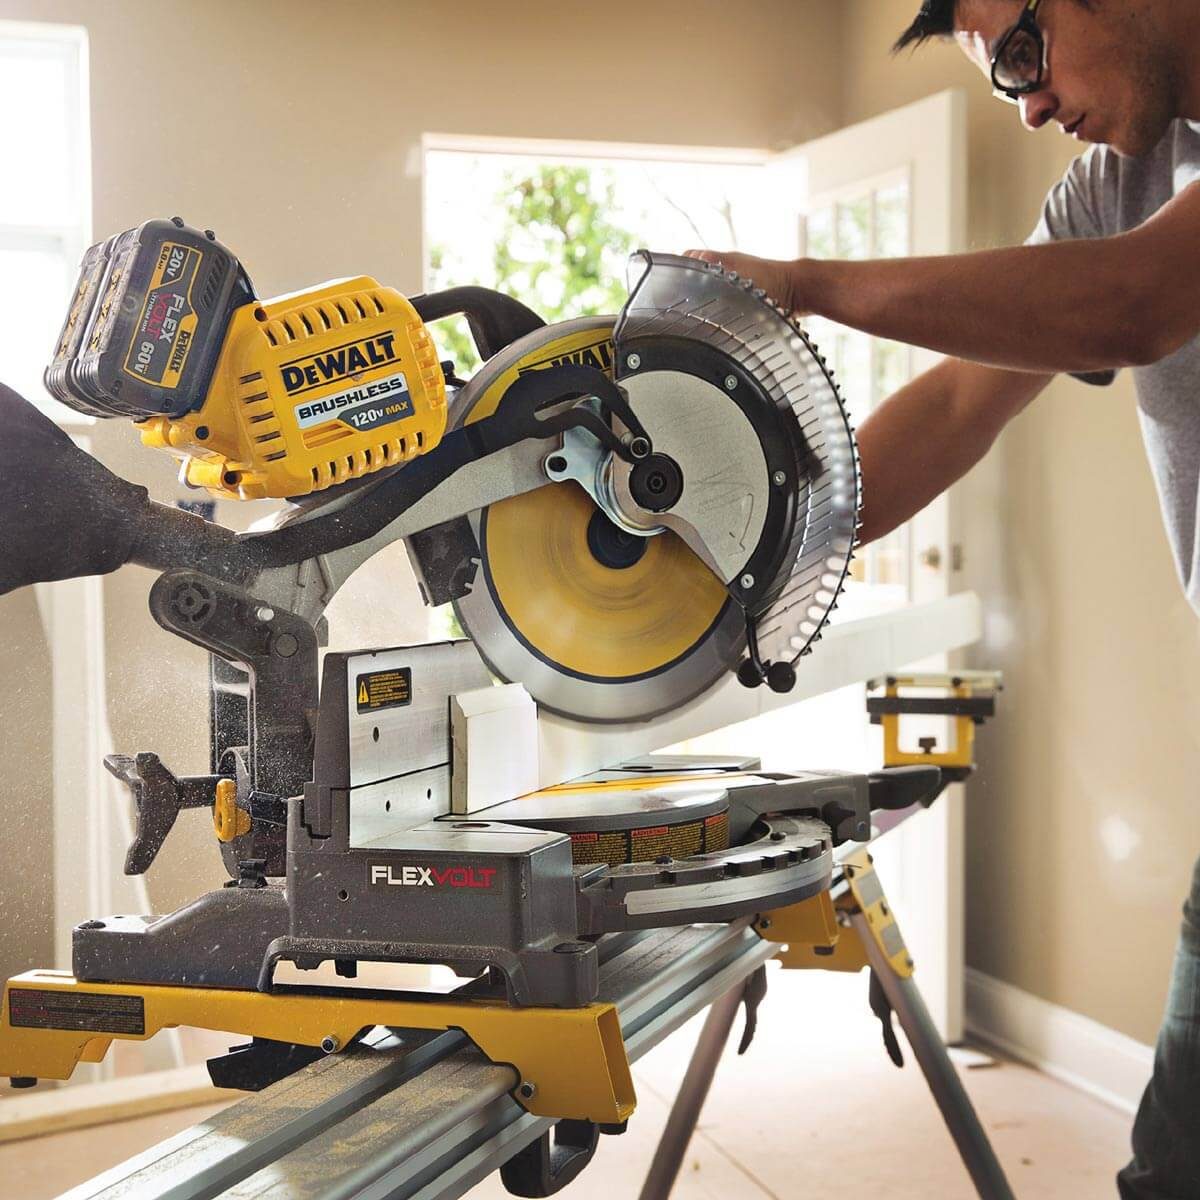 19 Coolest Cordless Tools For Your Collection